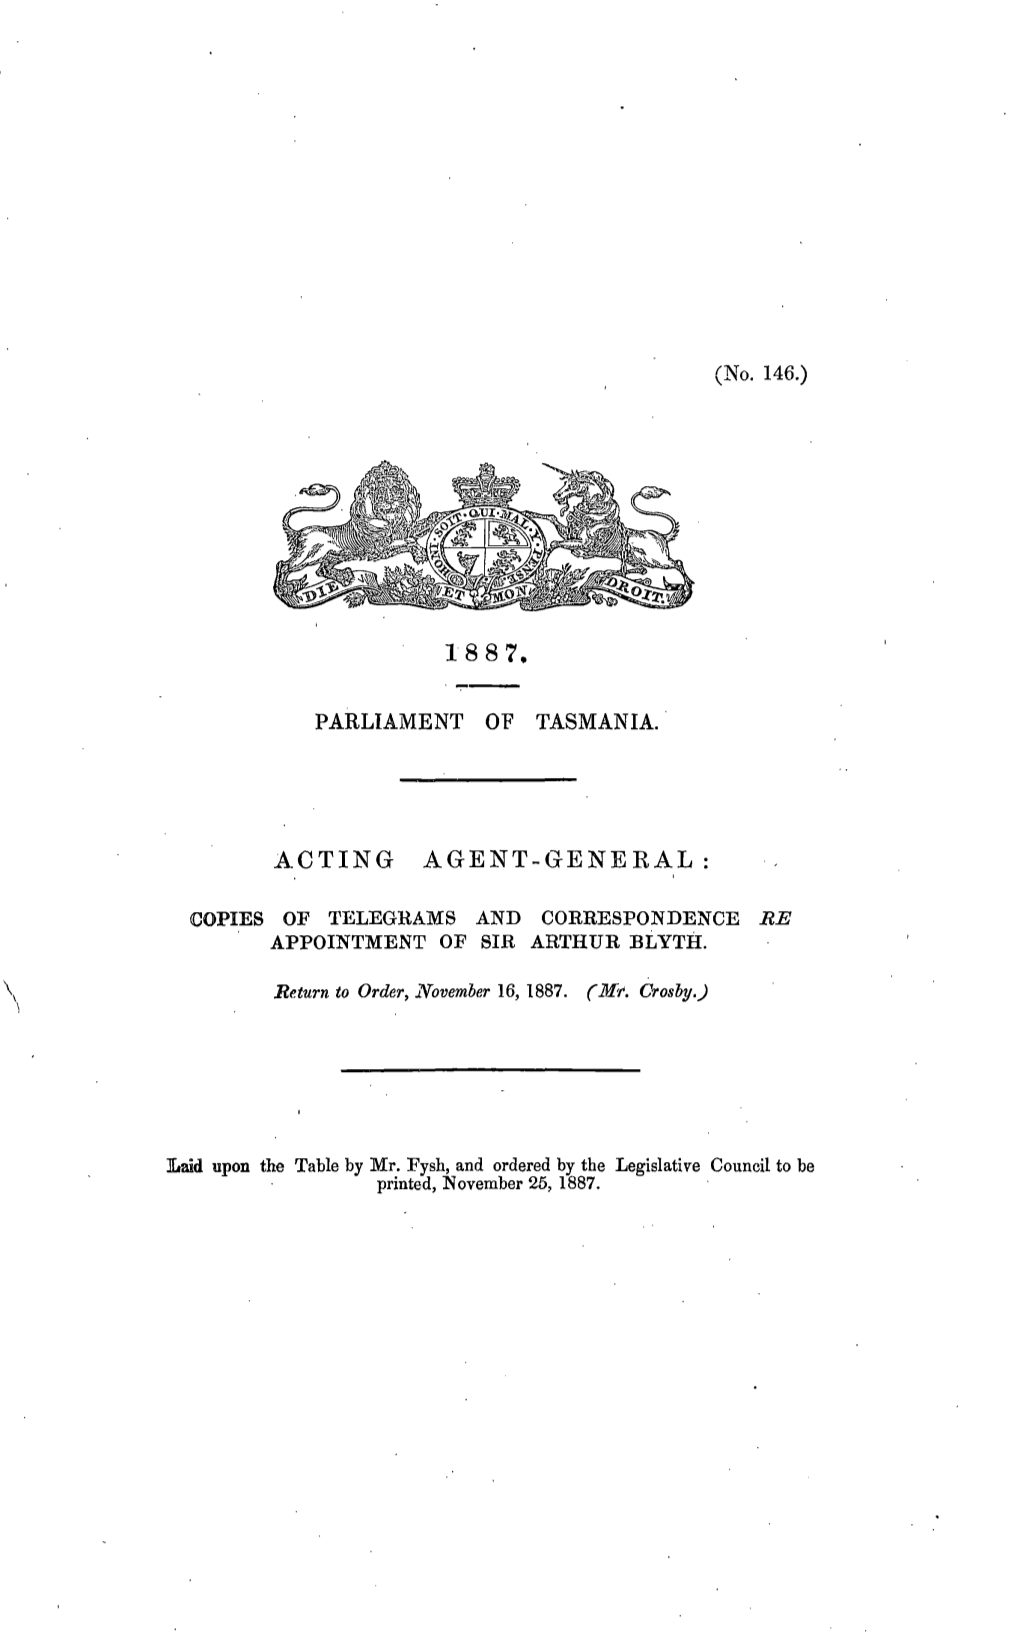 Acting Agent-General Copies of Telegrams and Correspondence